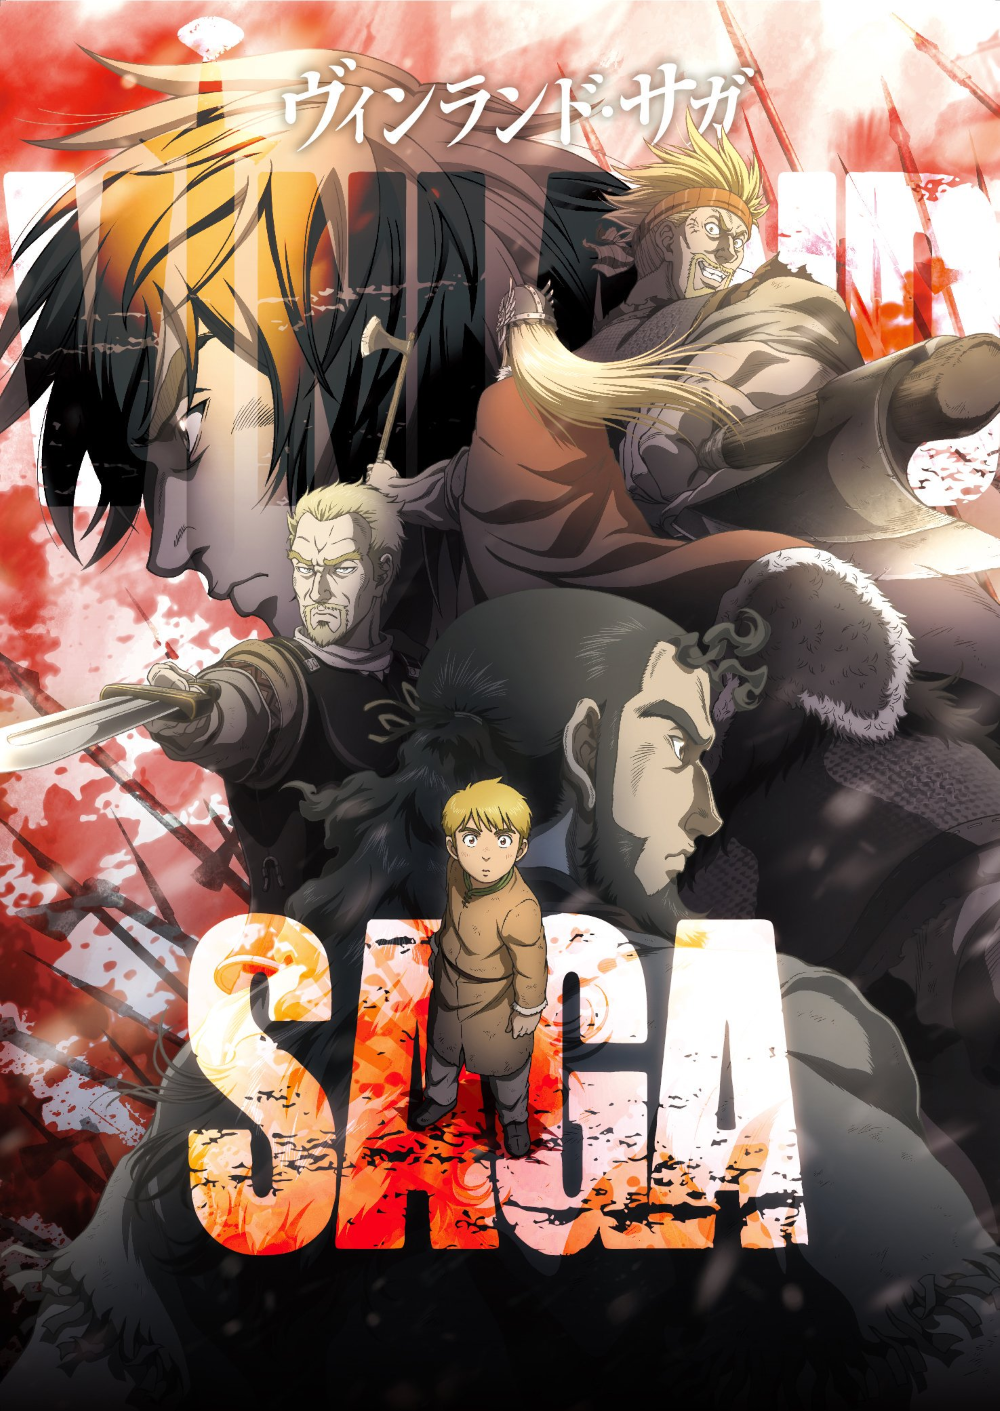 Vinland Saga Season 1 Overview and Ending Explained  Culture of Gaming